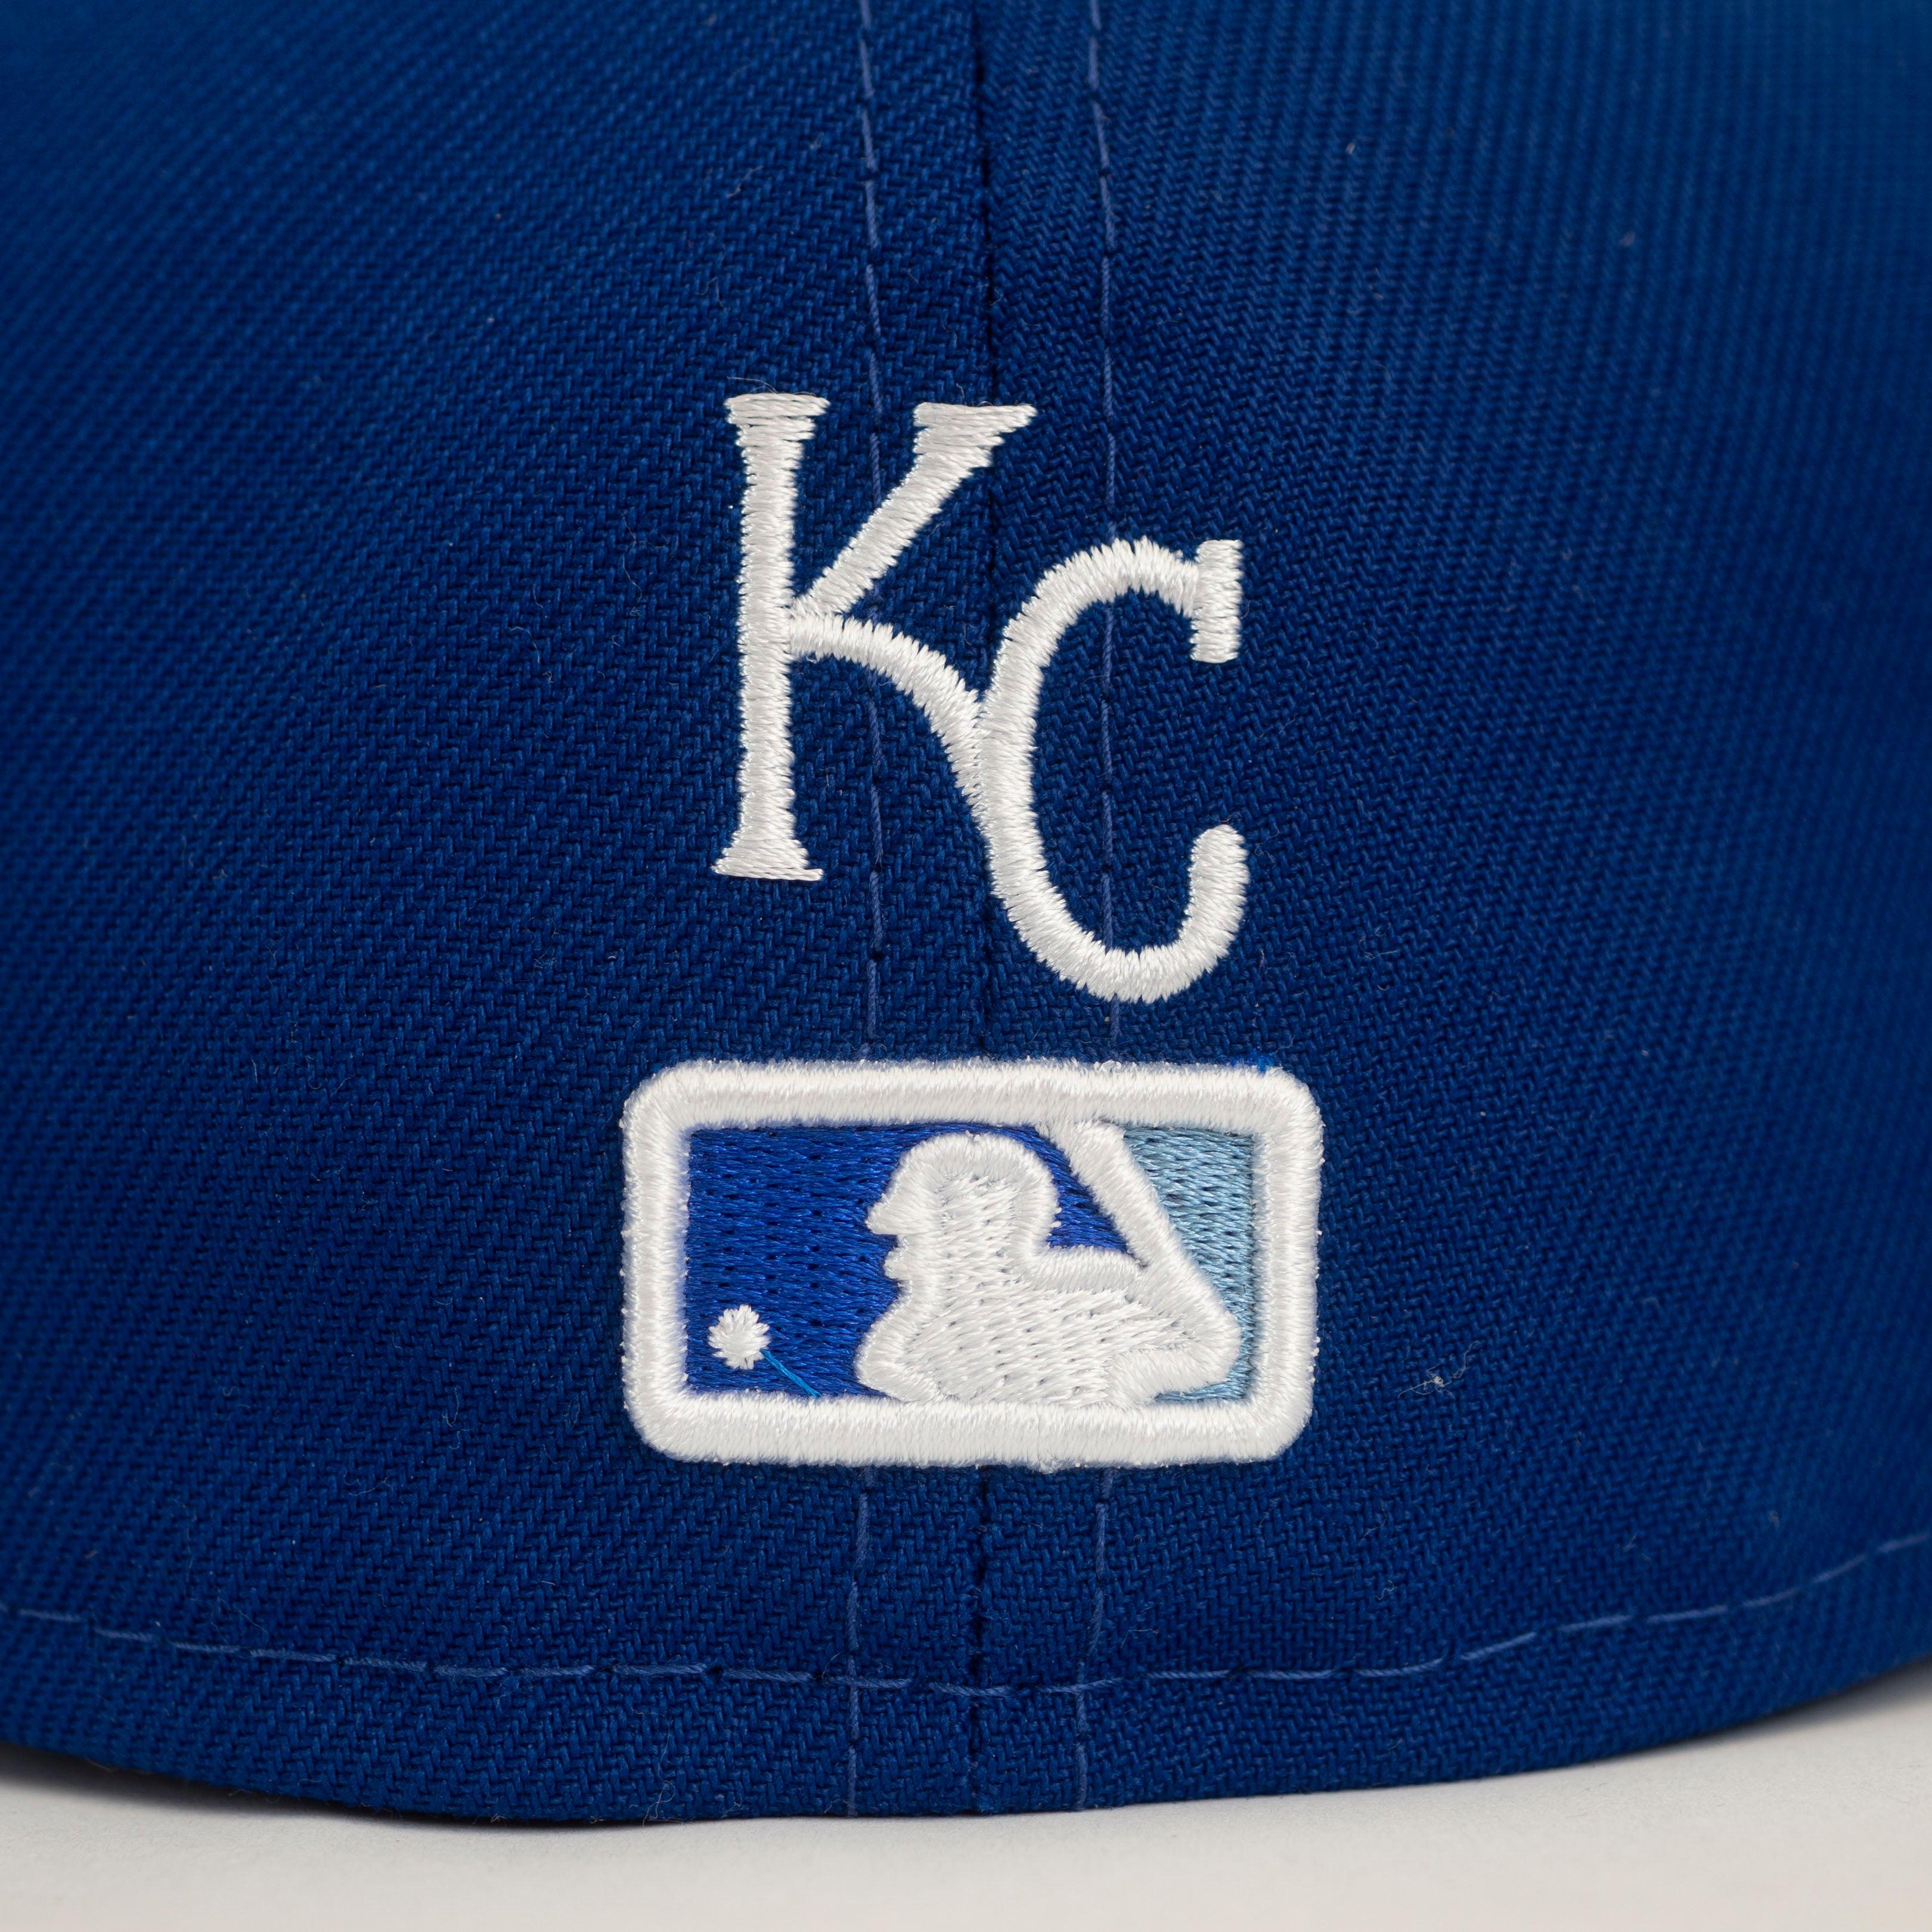 NEW ERA 59FIFTY MLB KANSAS CITY ROYALS SIDE PATCH BLOOM BLUE / SKY BLUE UV FITTED CAP - FAM